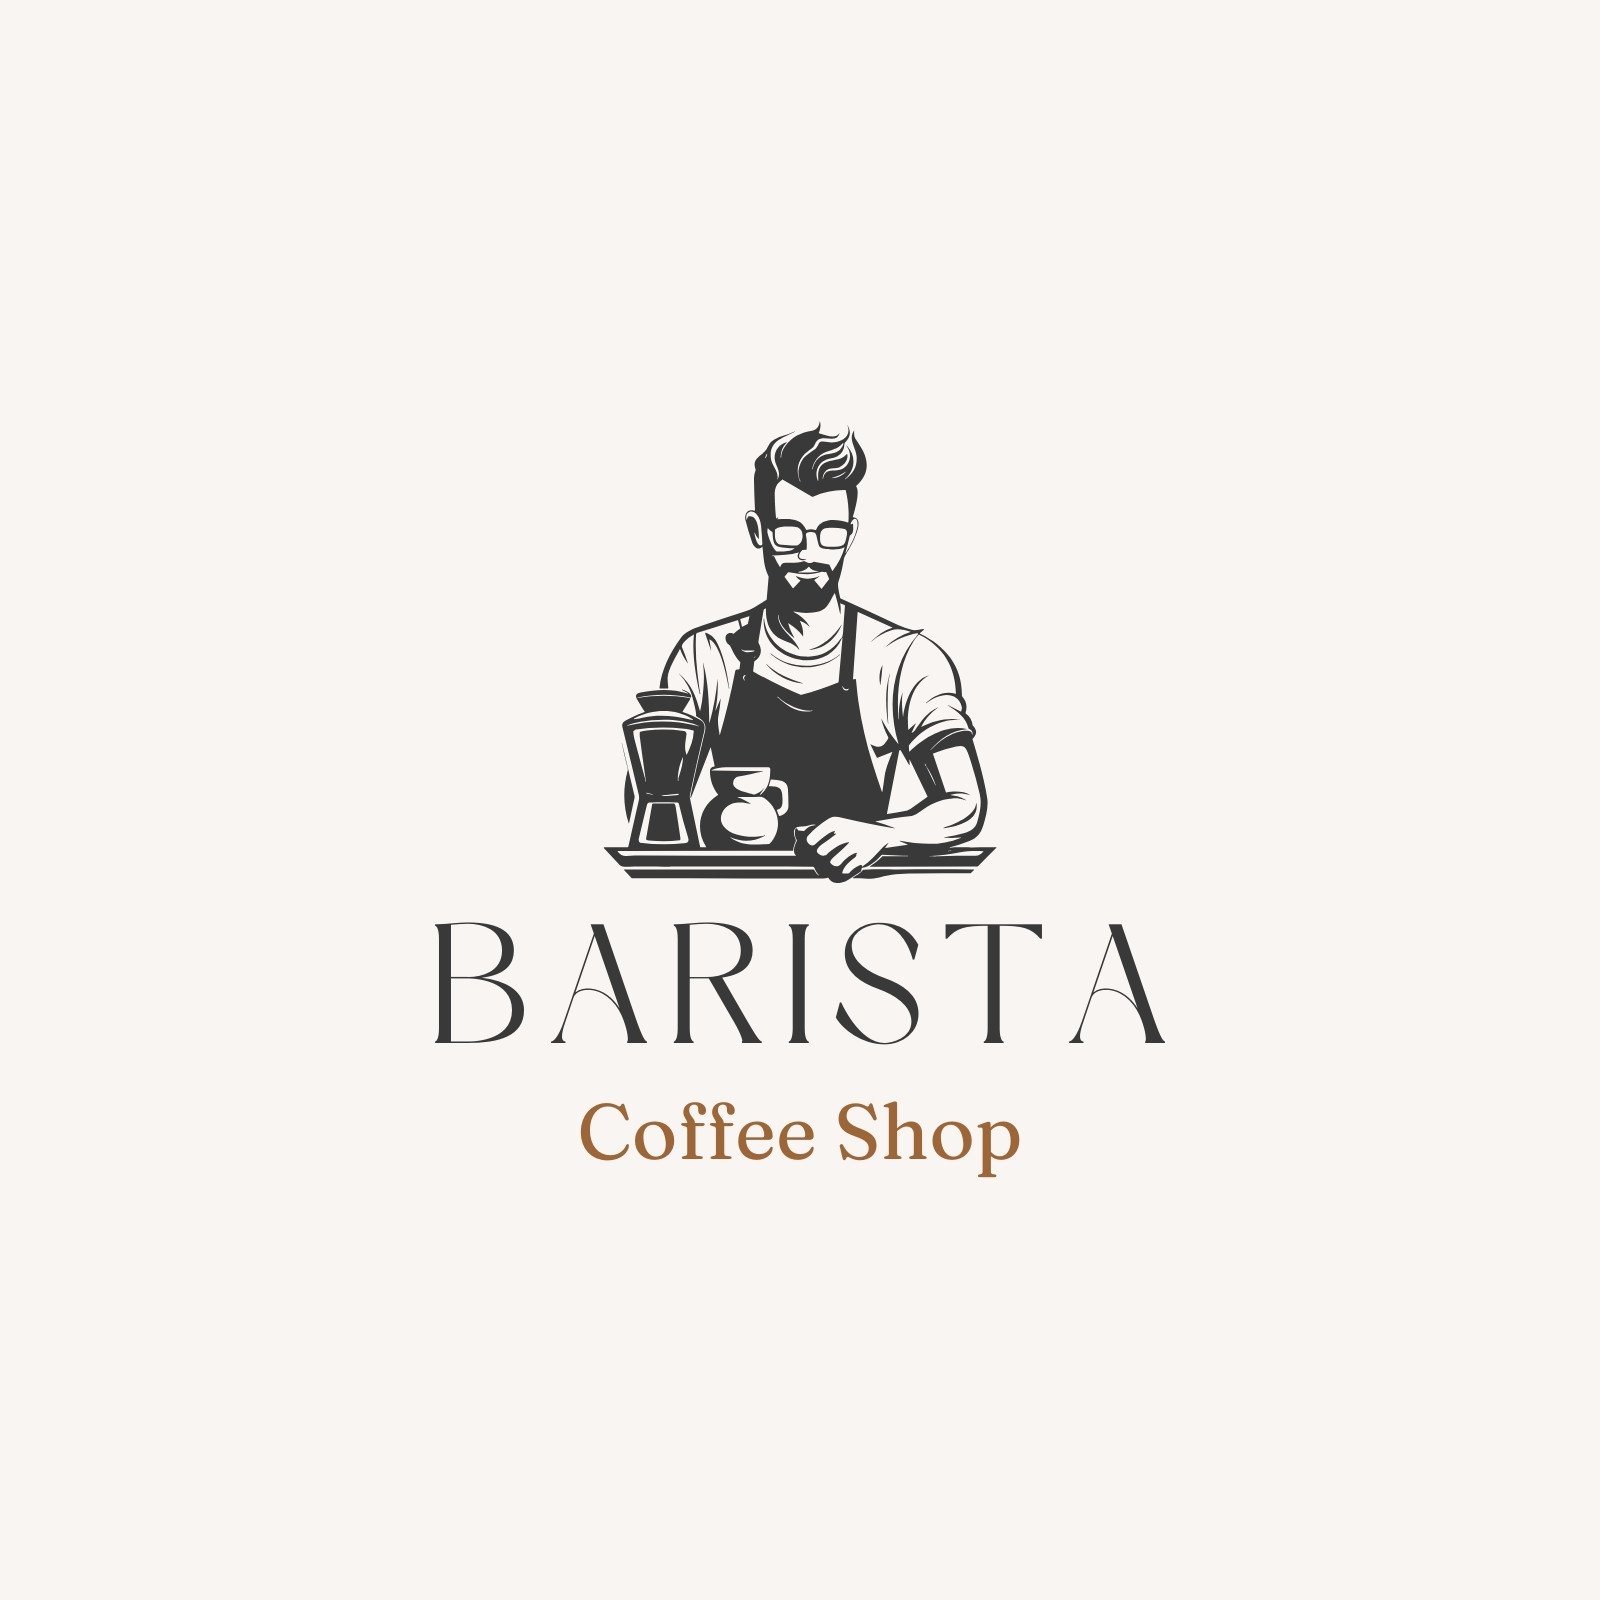 The Barista - Opposite the Arch